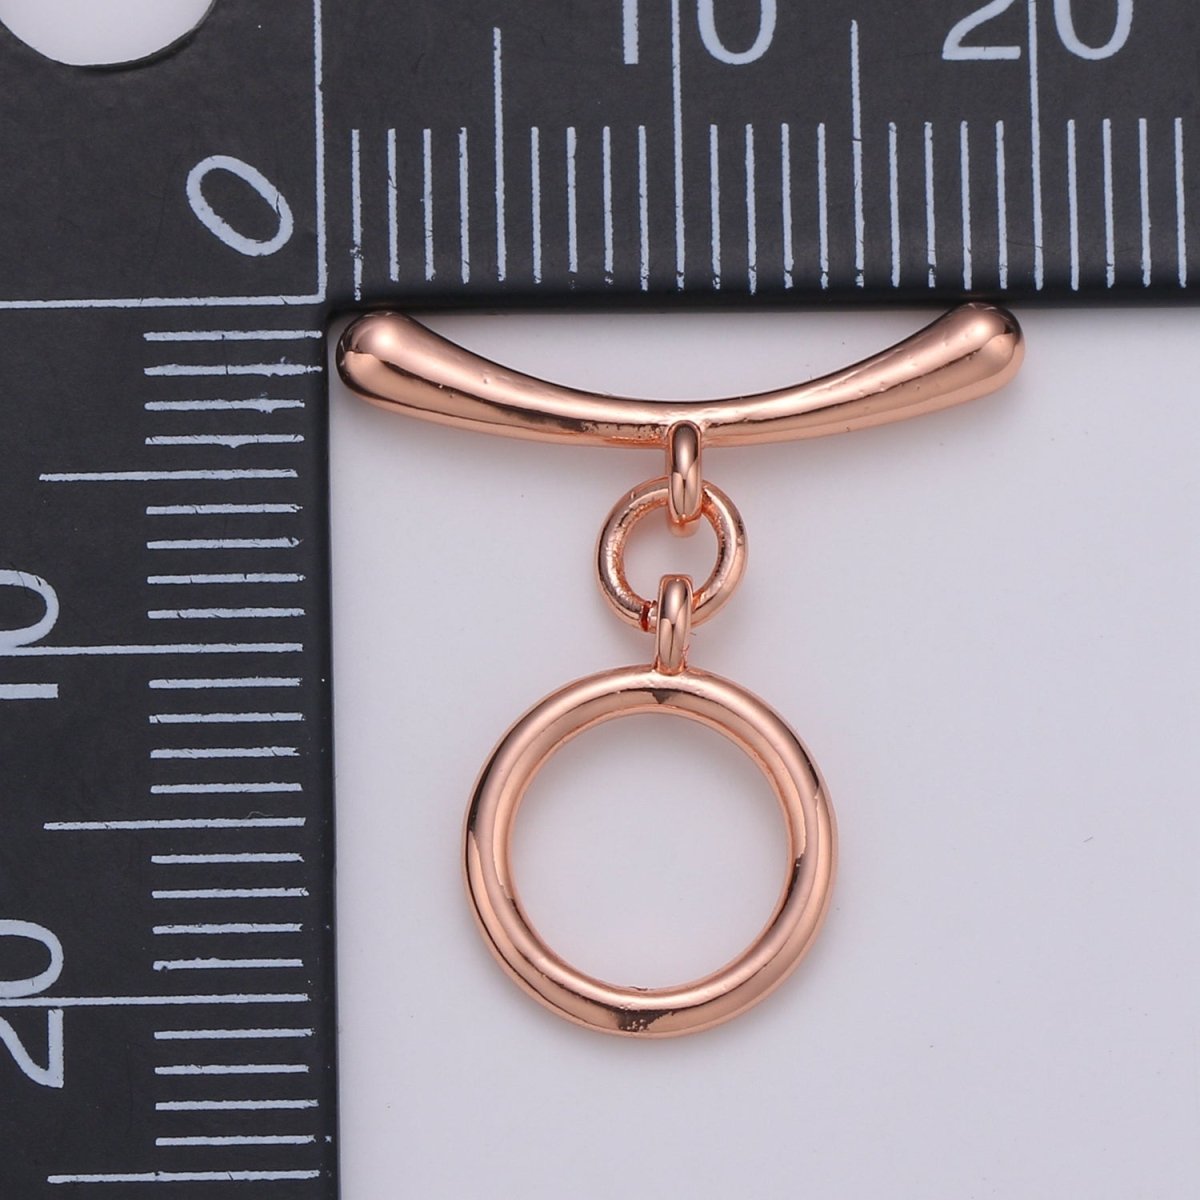 24K Gold Filled Toggle Clasp Smooth Circle OT Clasp For Jewelry Making Bracelet Necklace Diy Accessories Wholesale Supply Finding L-104~L-107 L-142 - DLUXCA